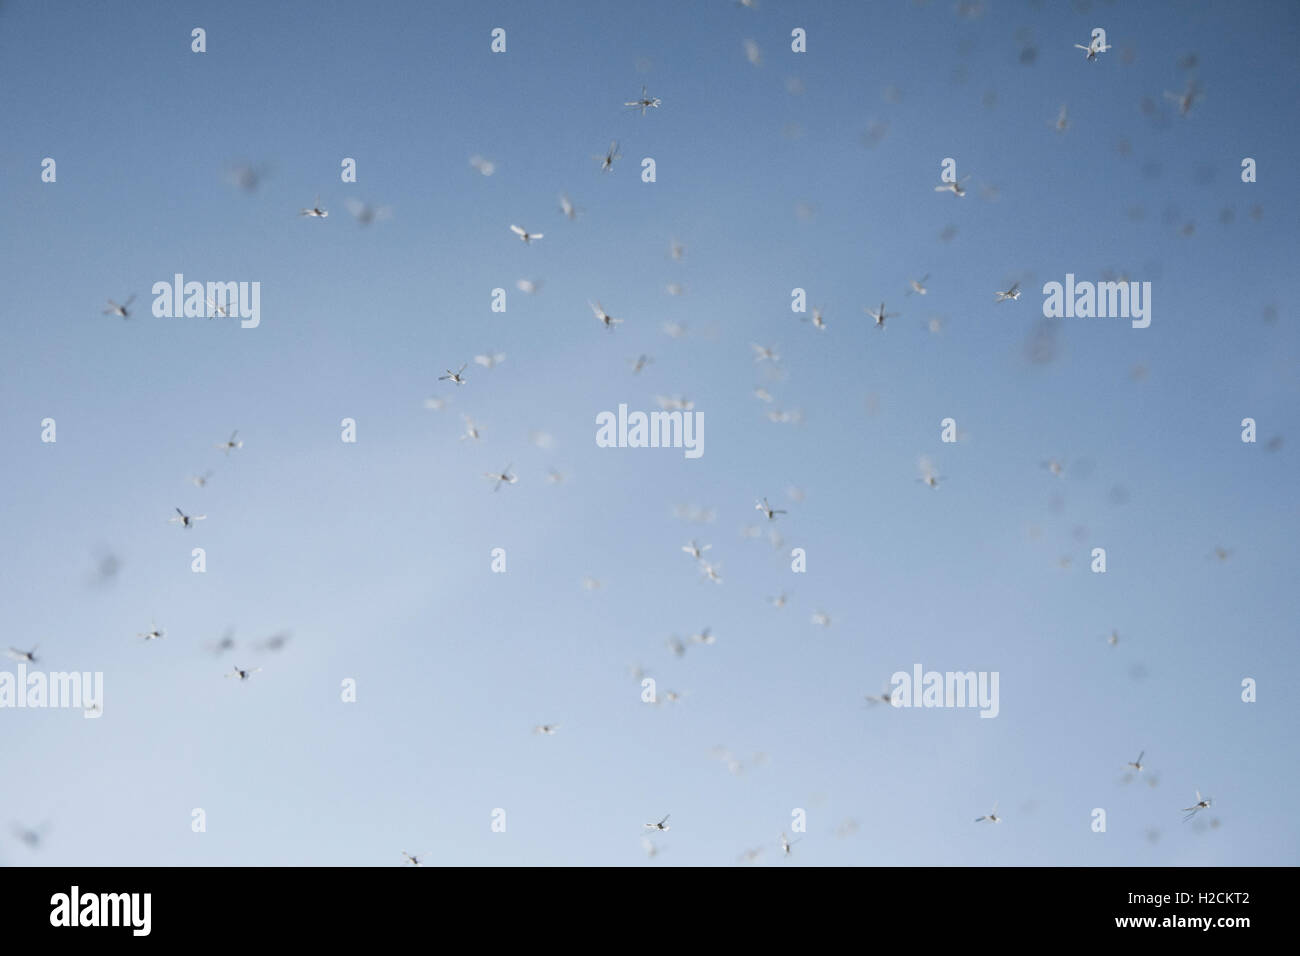 Swarm of mosquitos flying against a clear blue sky. Stock Photo